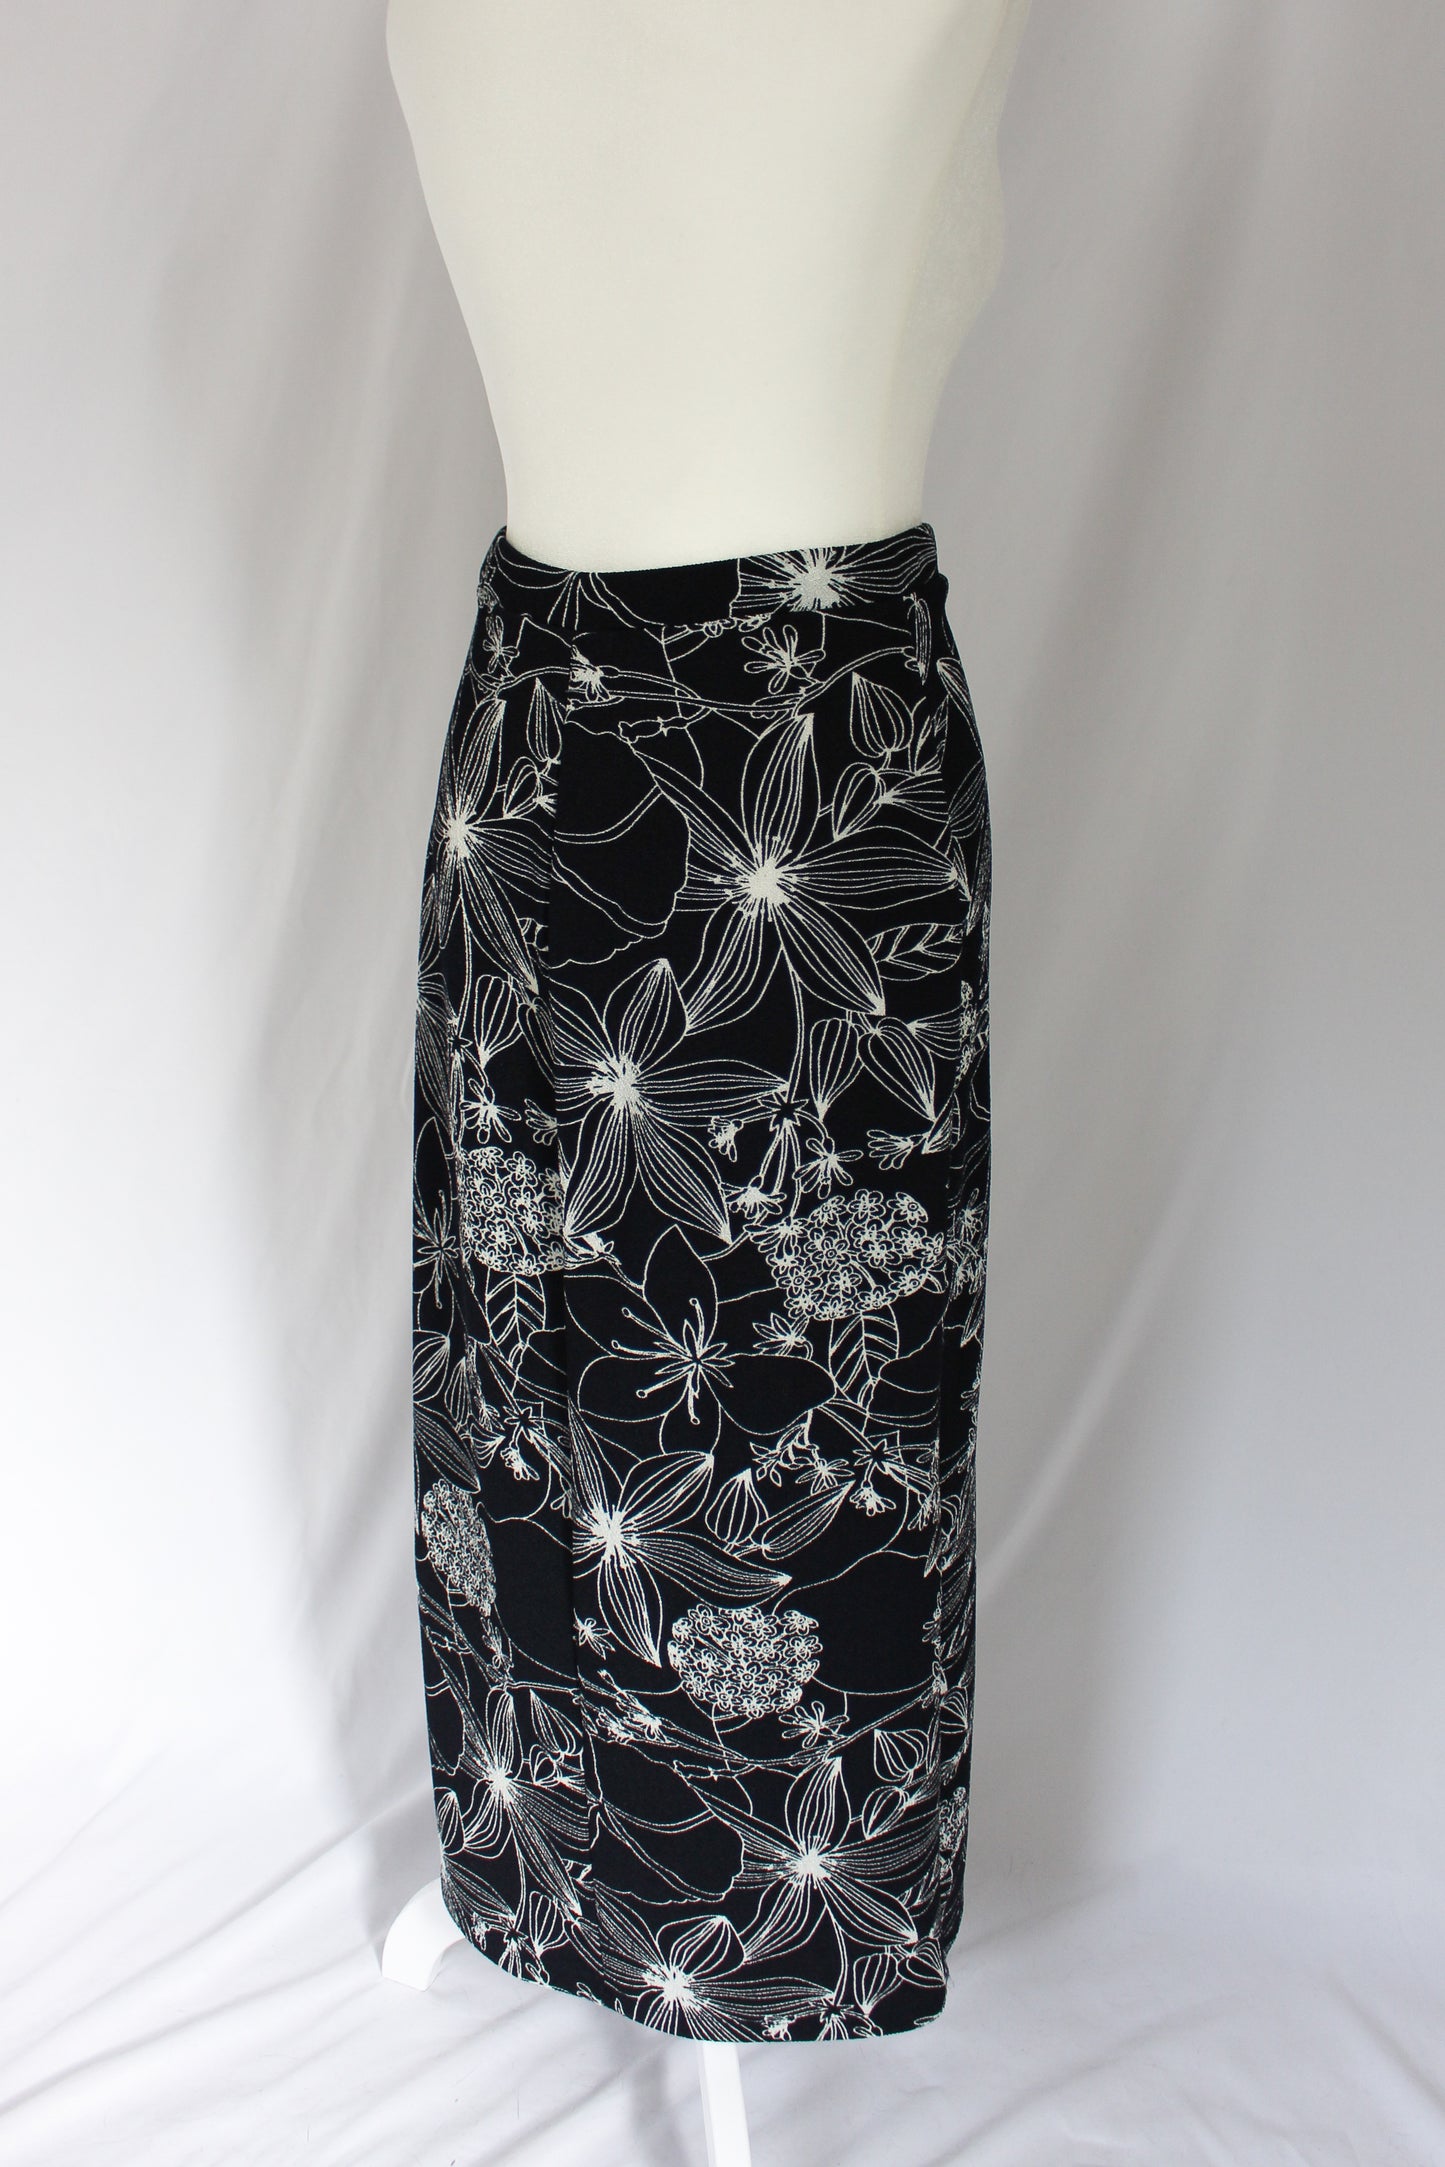 black skirt with white flower sketched design, maxi skirt with slit, 